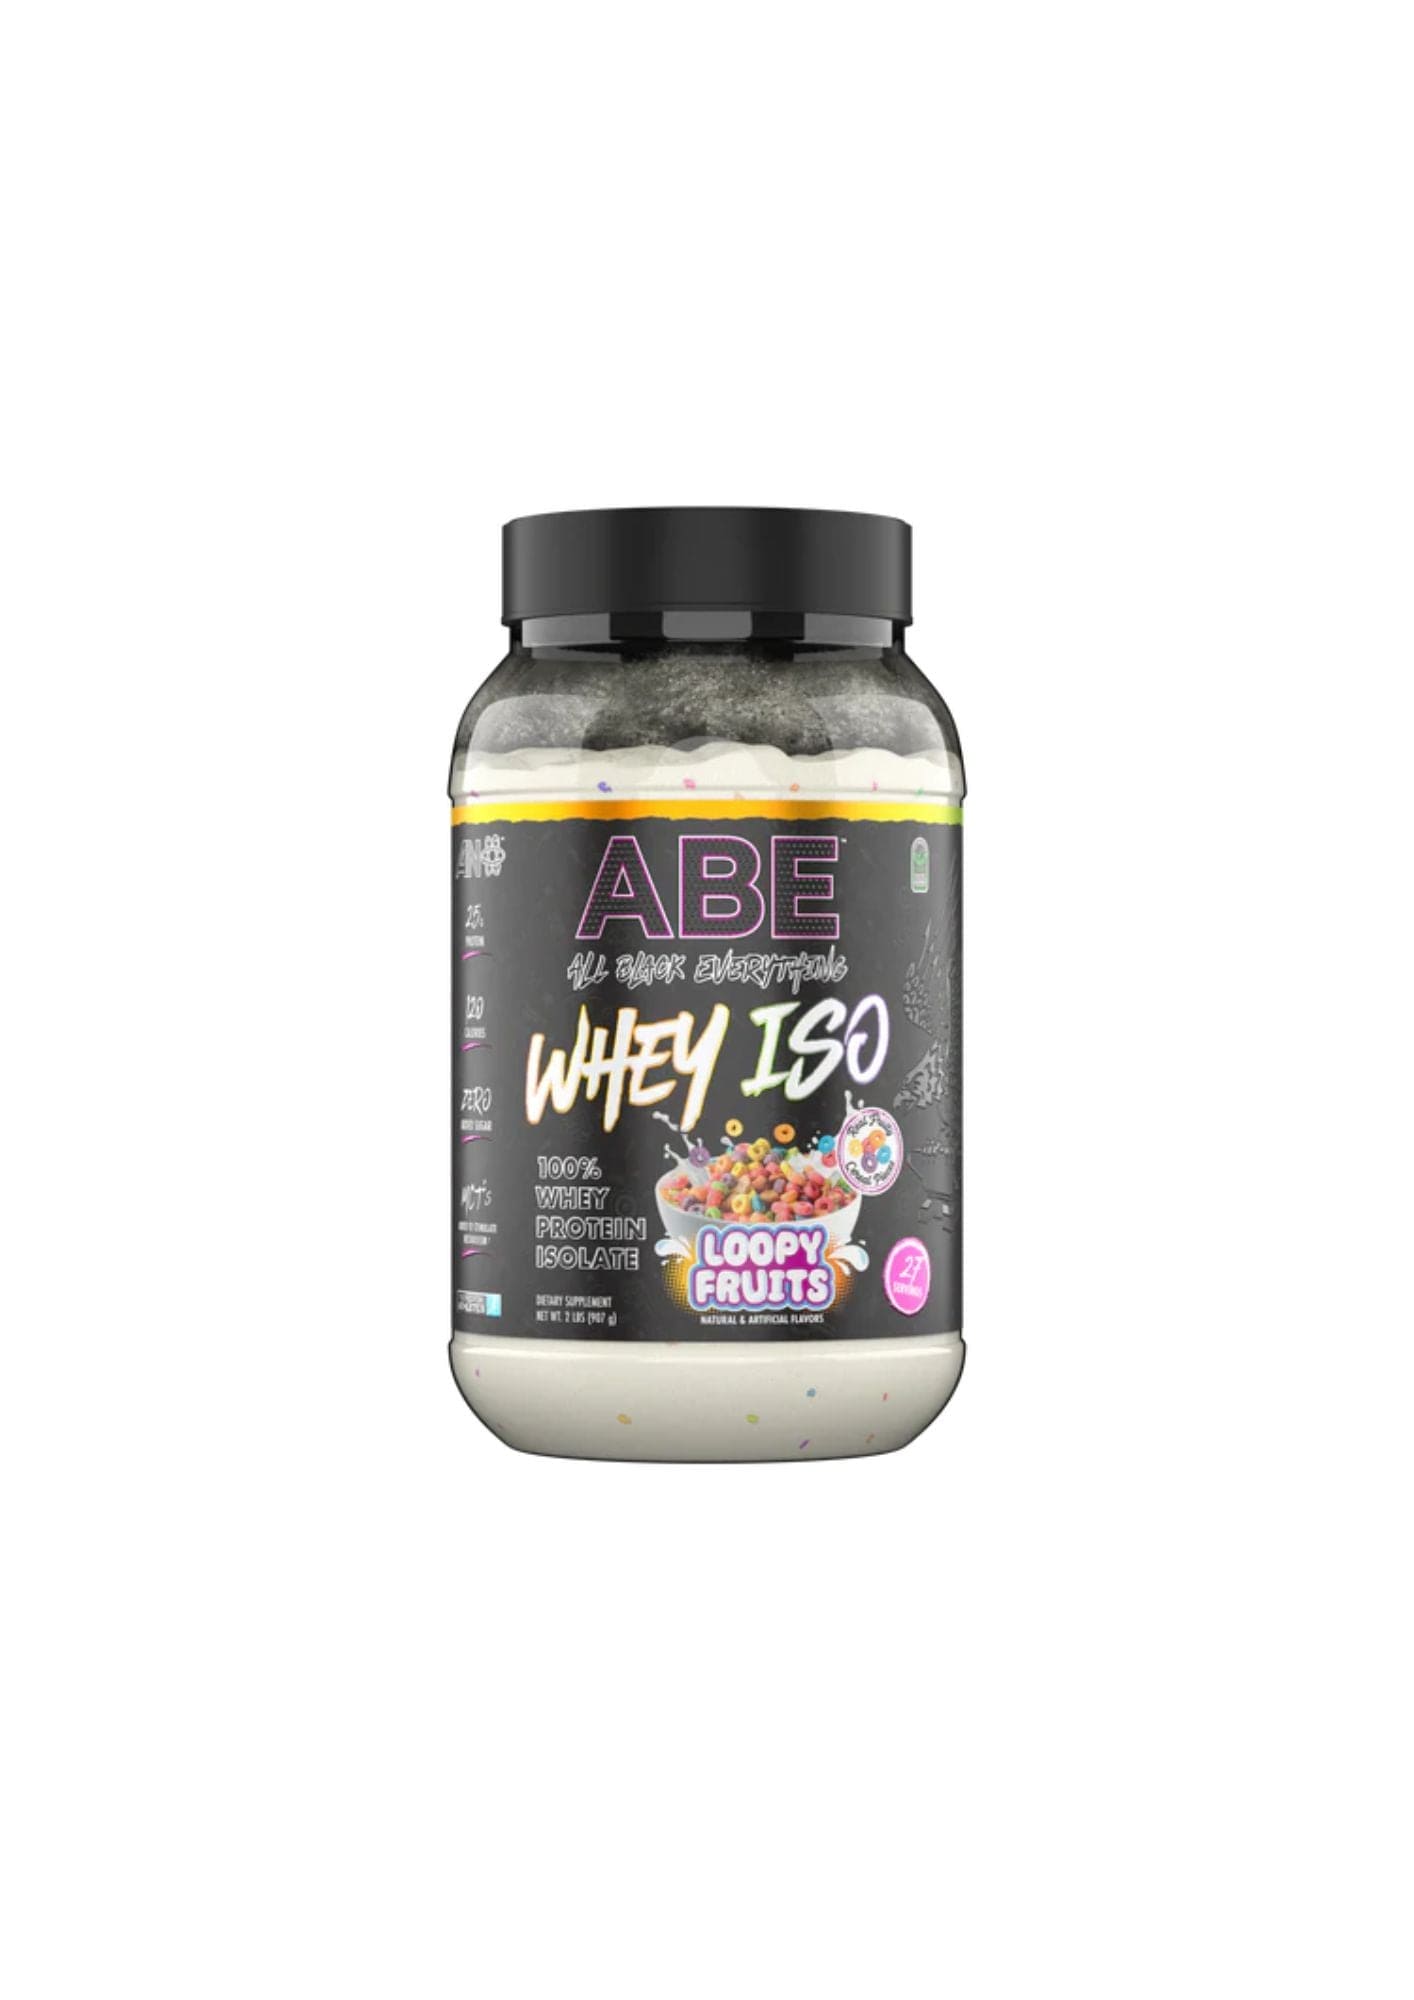 All Black Everything ABE ISO Whey Protein Powder Whey Isolate 2lb